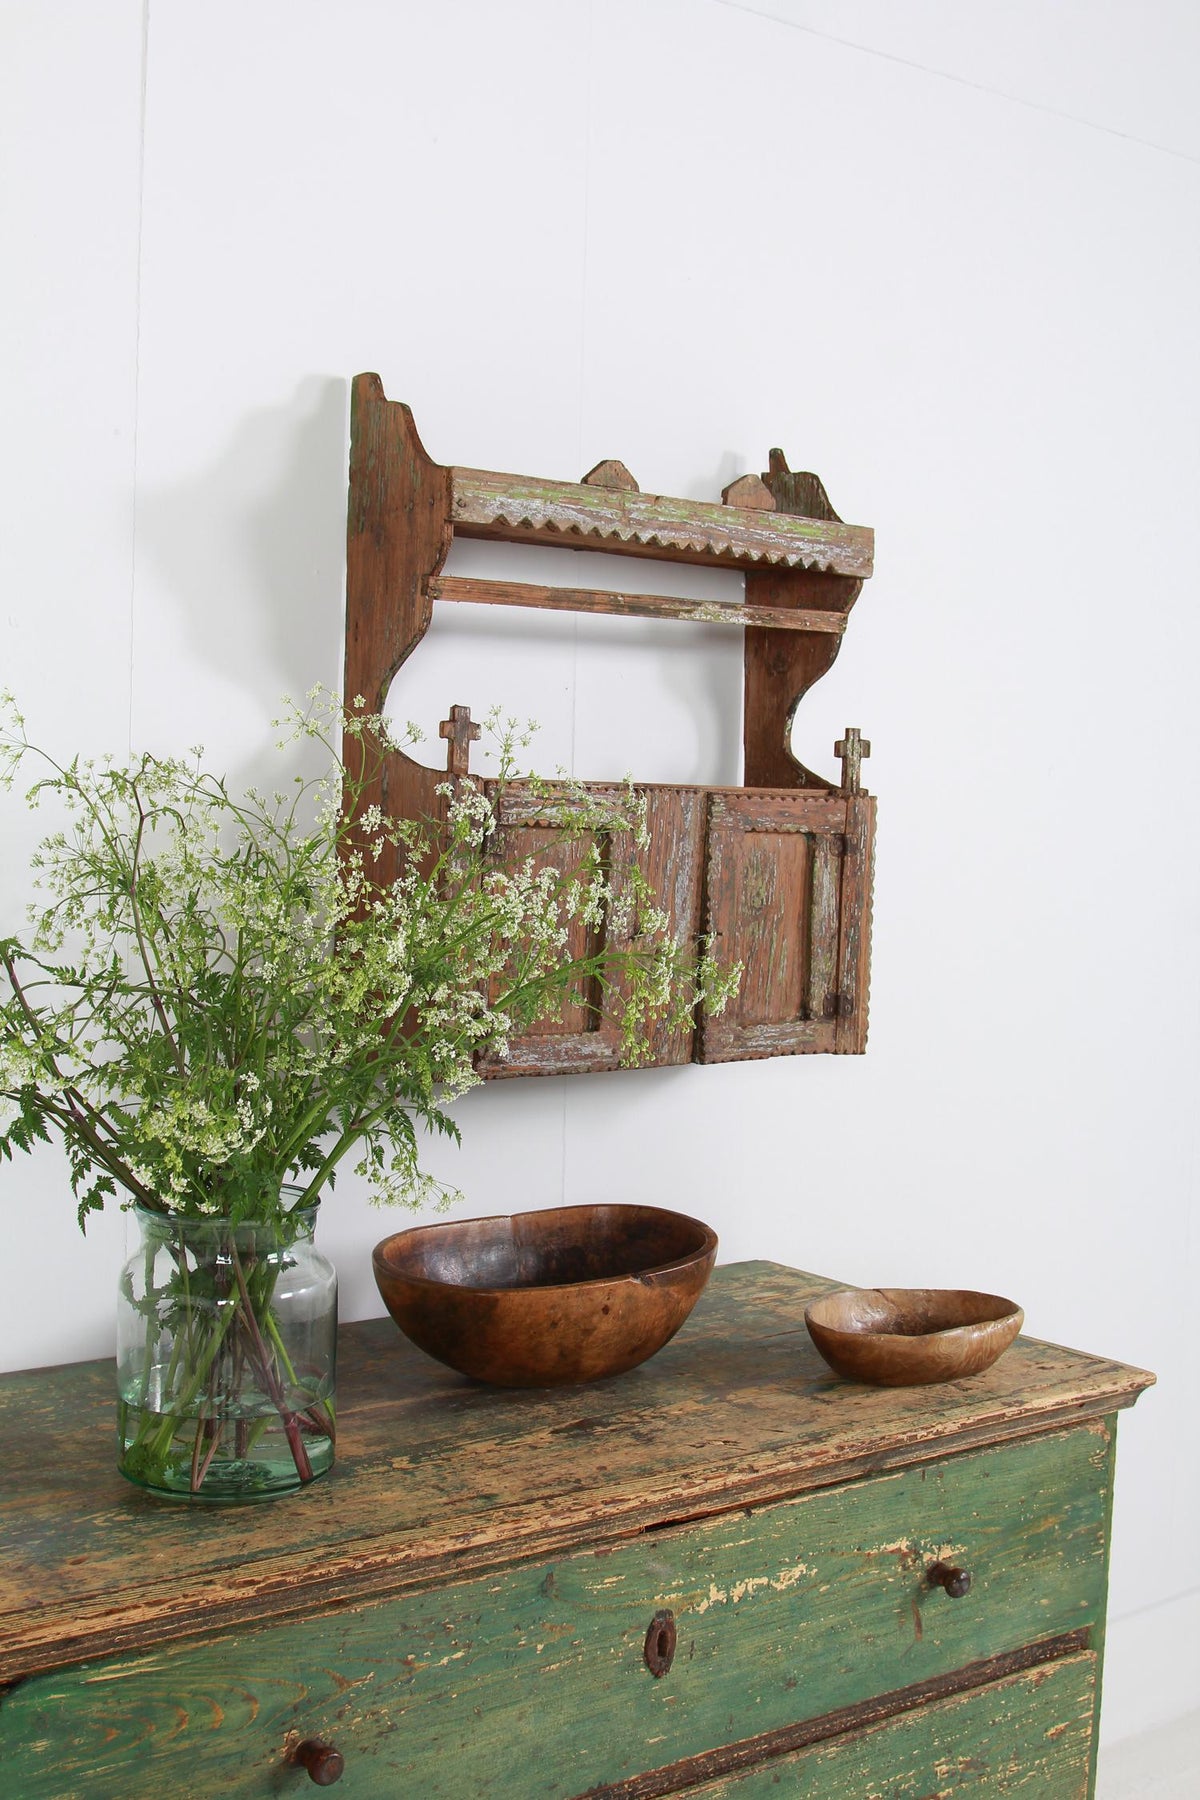 Rustic Country Hutsul Spice Shelf with Original Paint